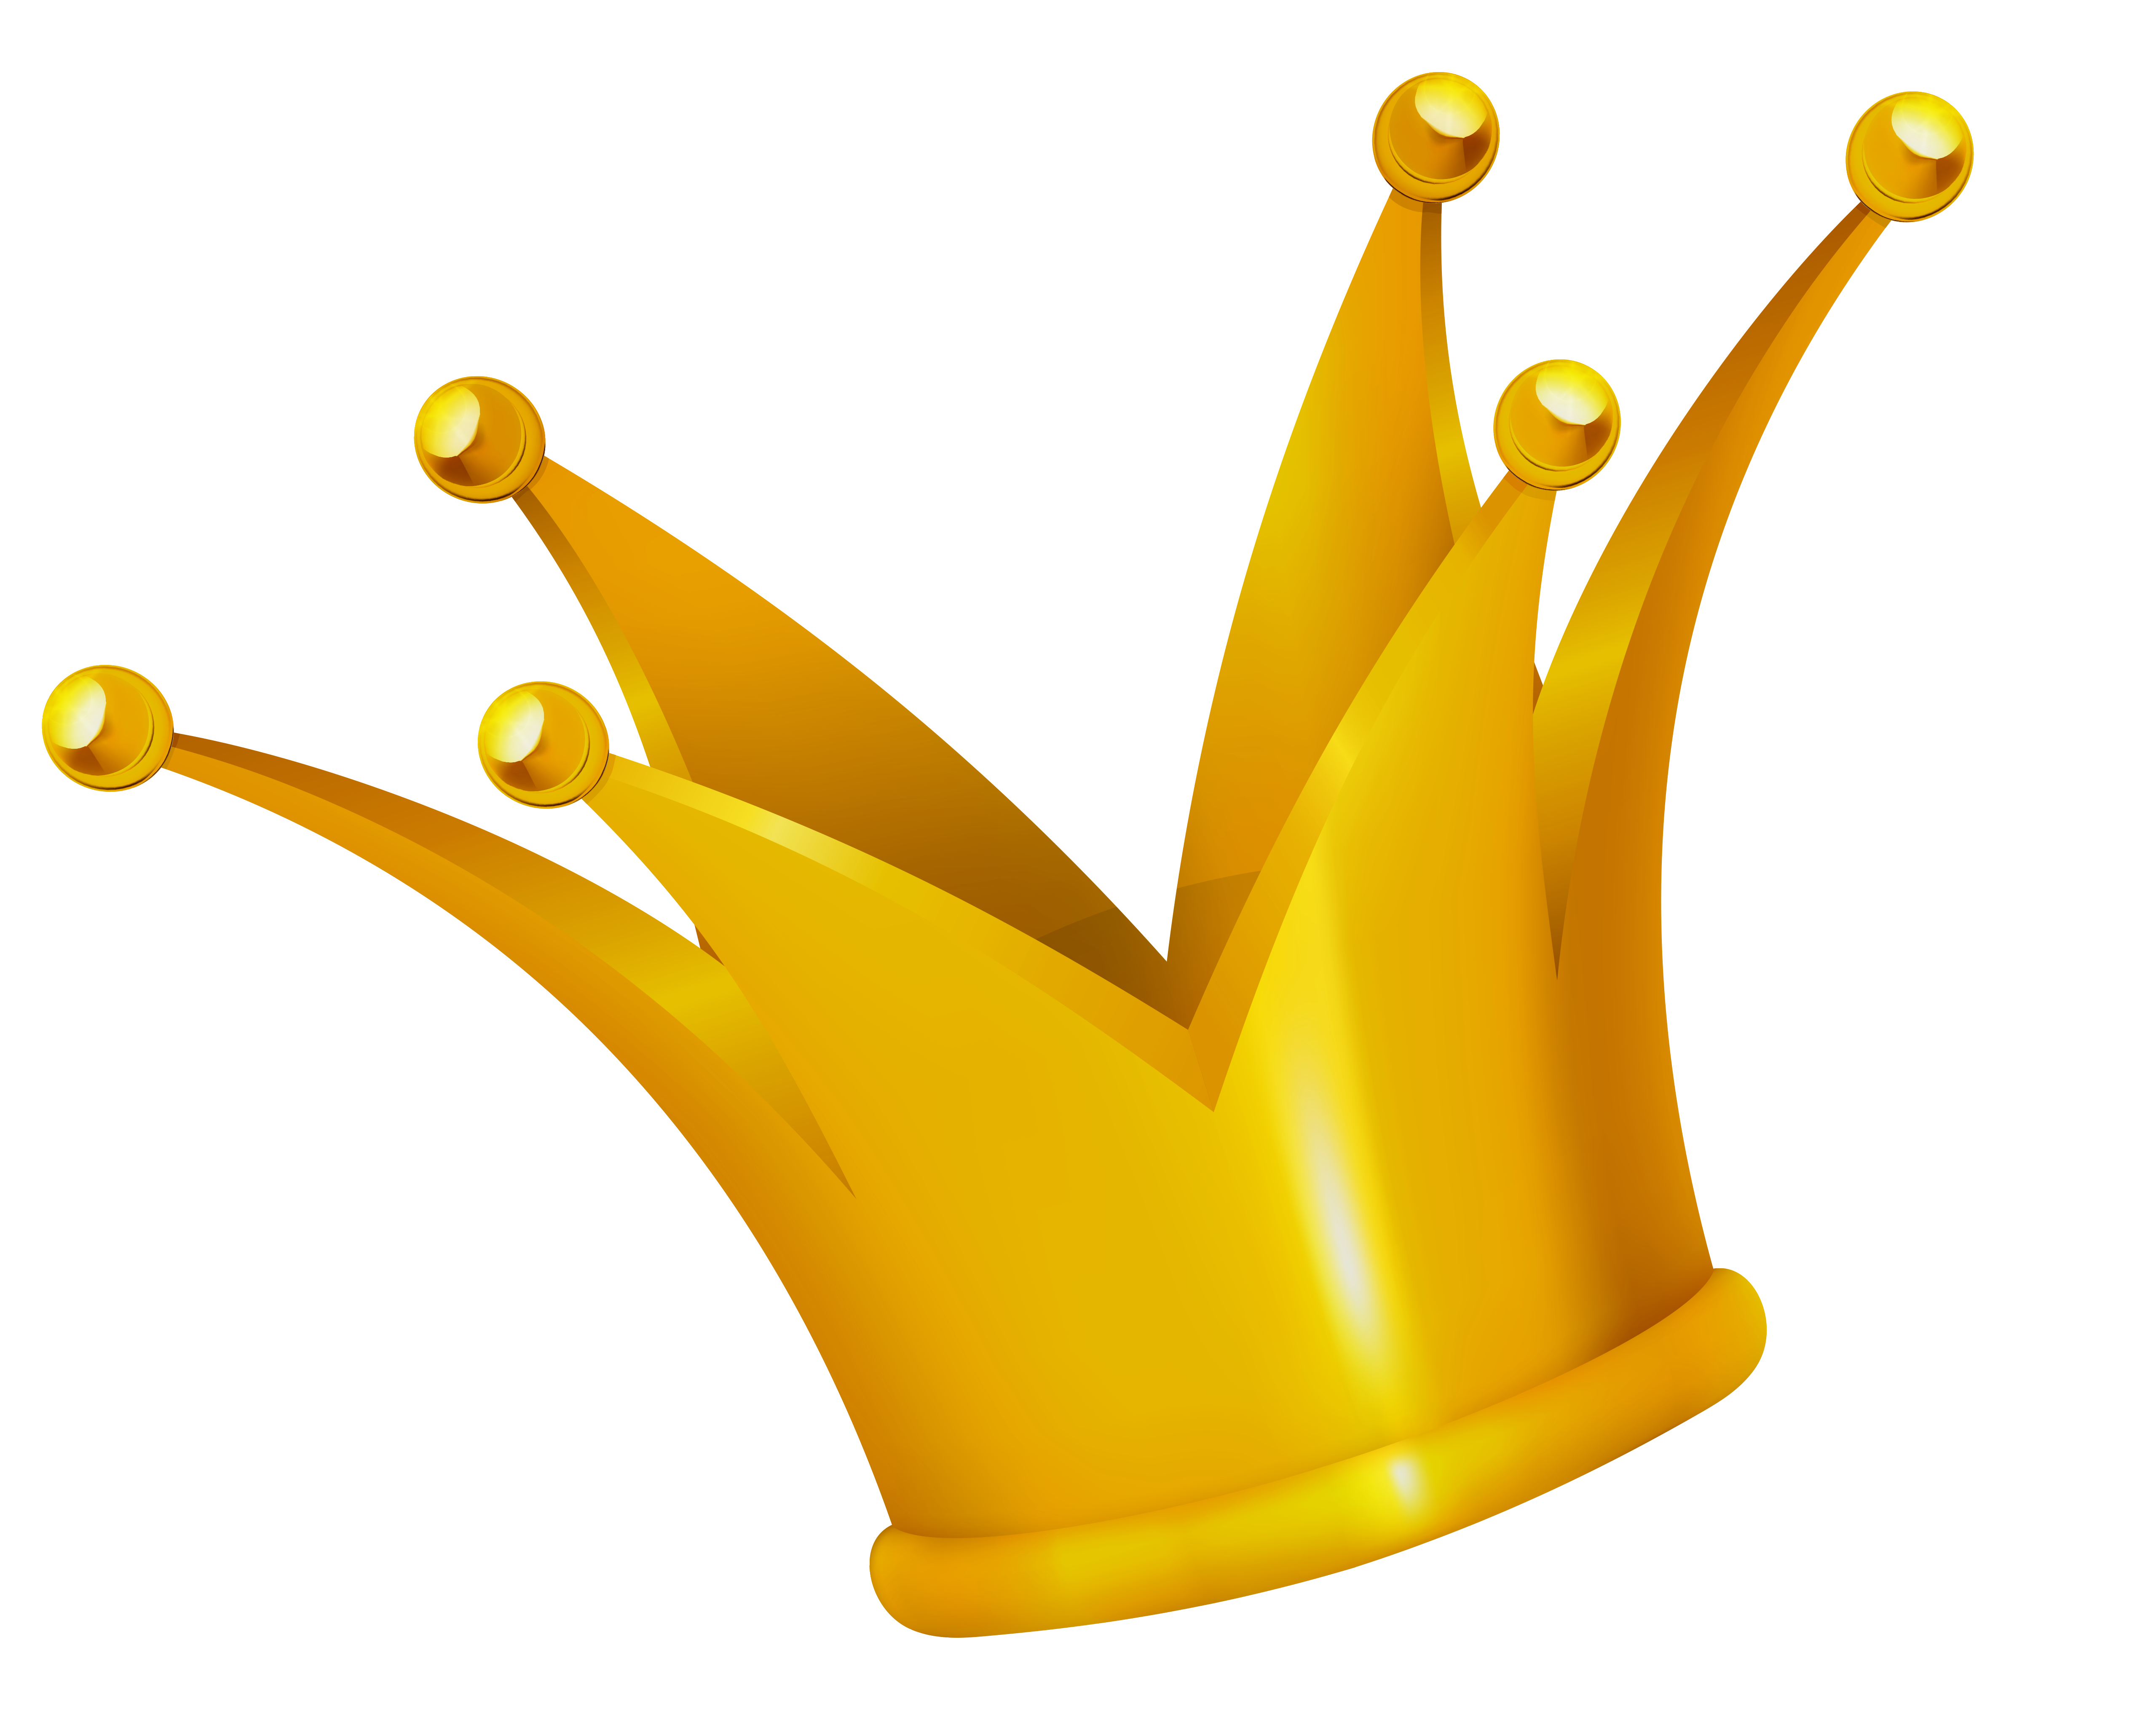 king crown clipart